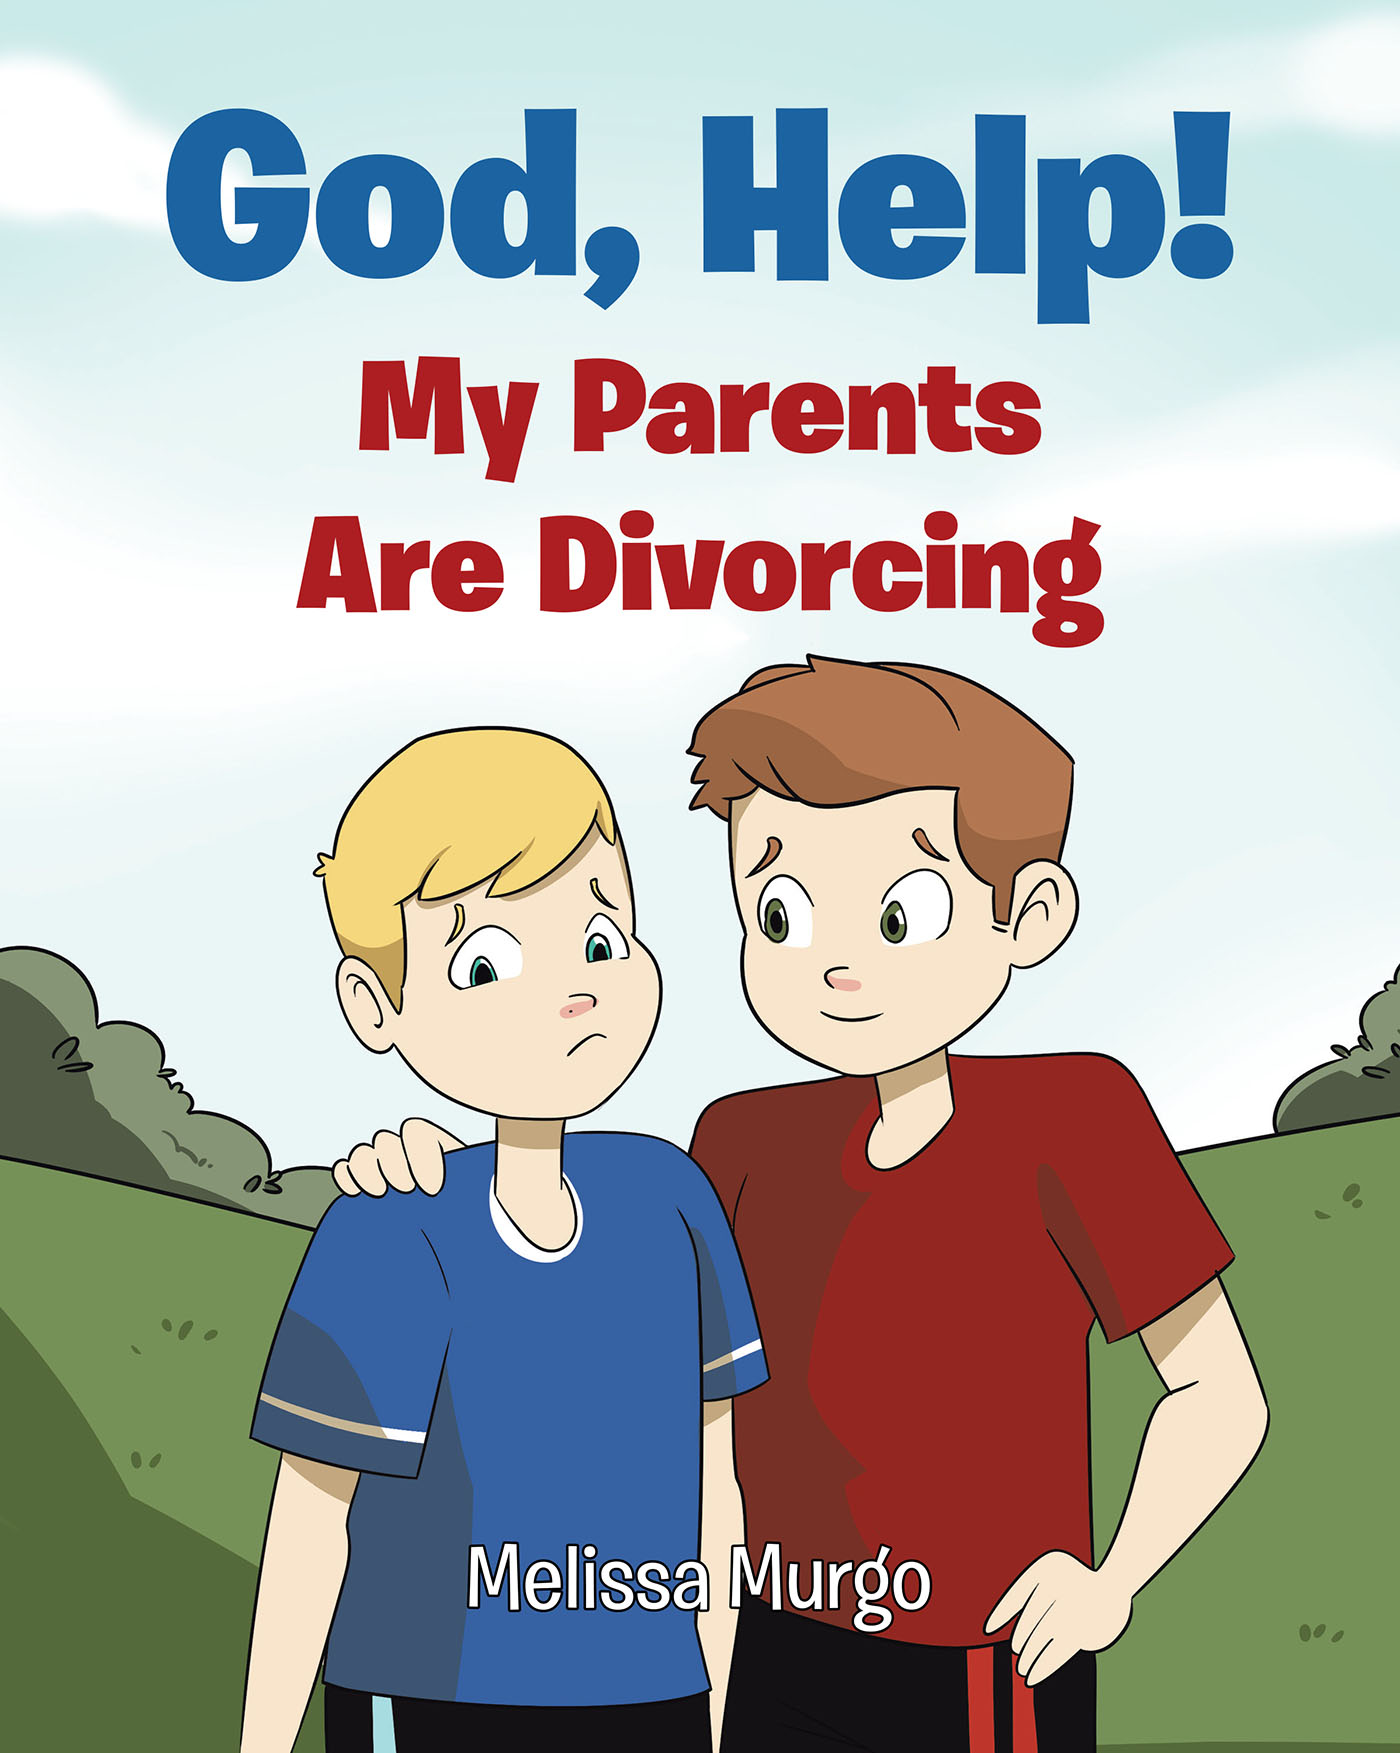 Melissa Murgo’s Newly Released "God, Help! My Parents Are Divorcing" is a Spiritually Driven Message of Comfort and Understanding for Children